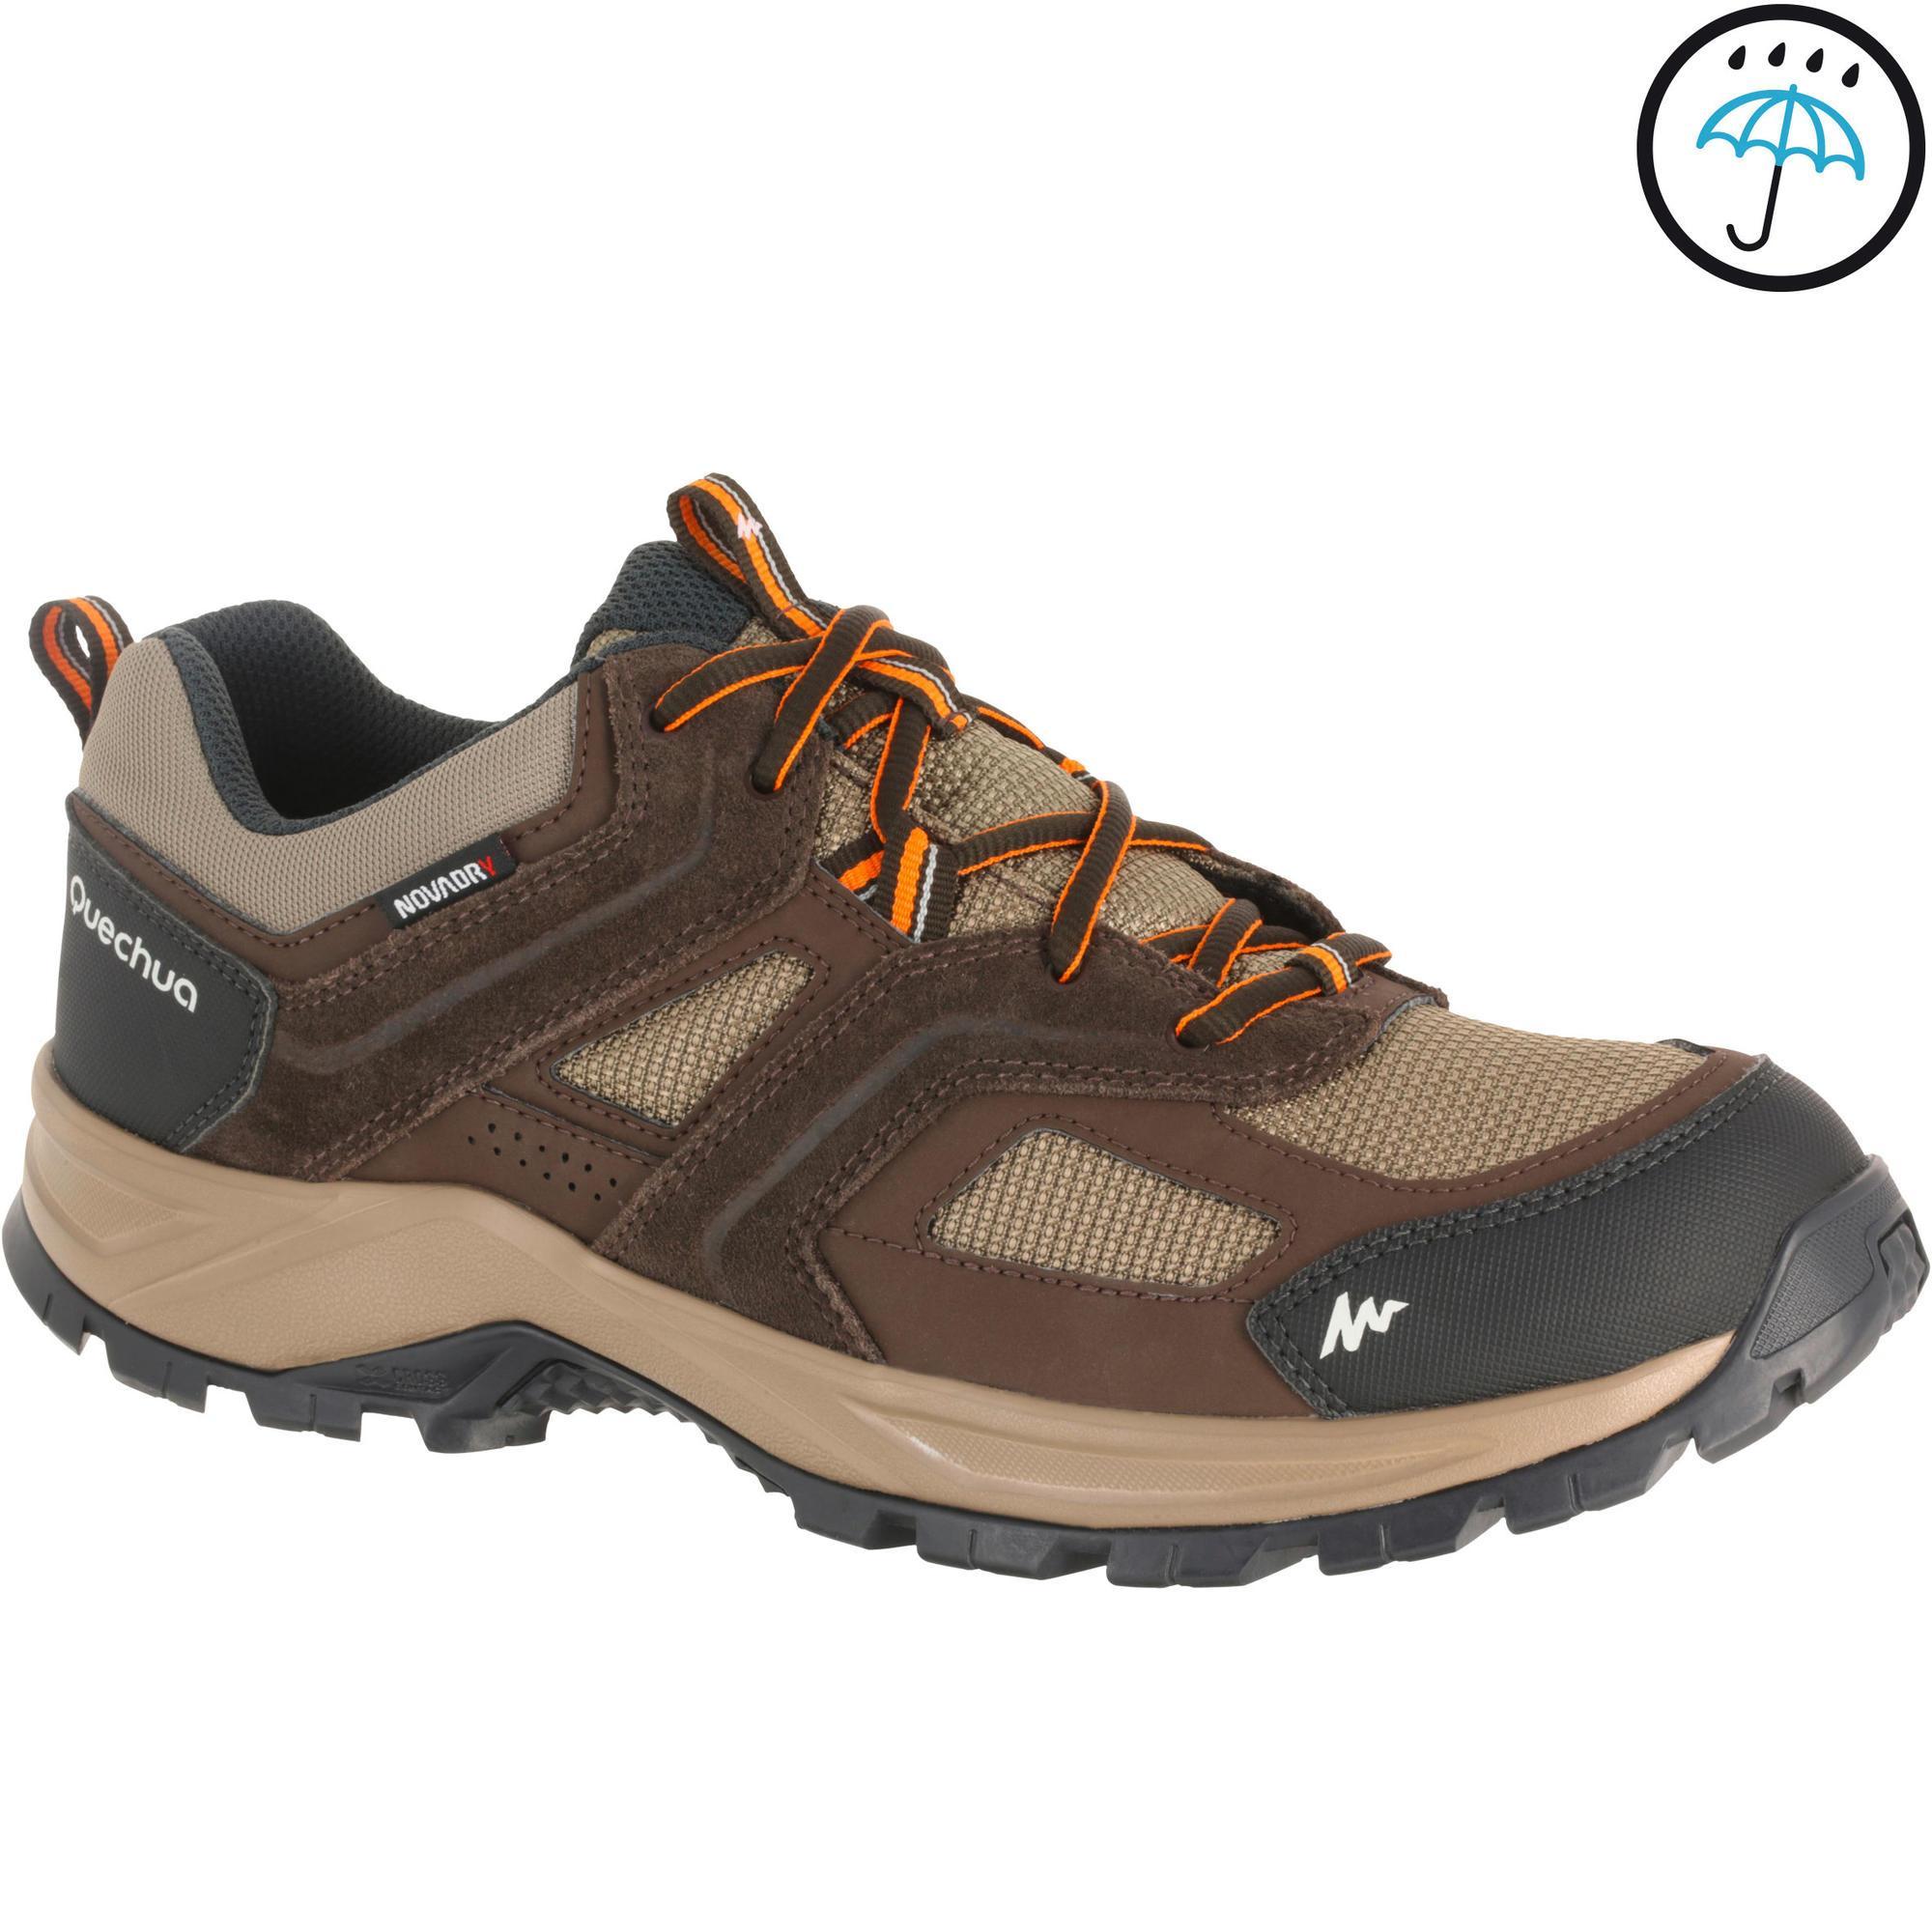 Forclaz 100 Male Waterproof Hiking Boot - Brown | Quechua